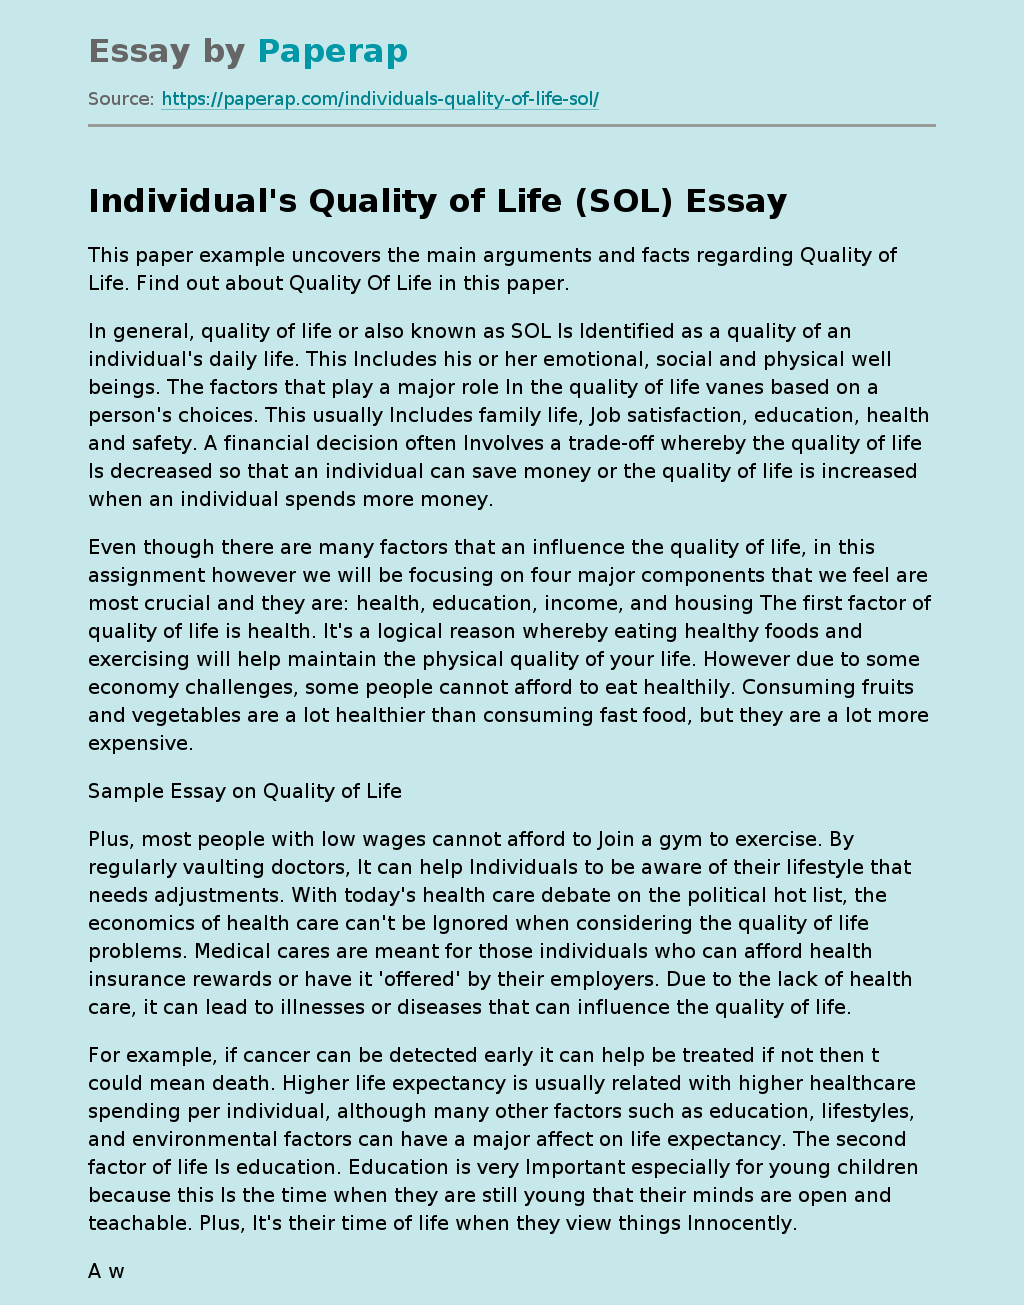 Individual's Quality of Life (SOL)